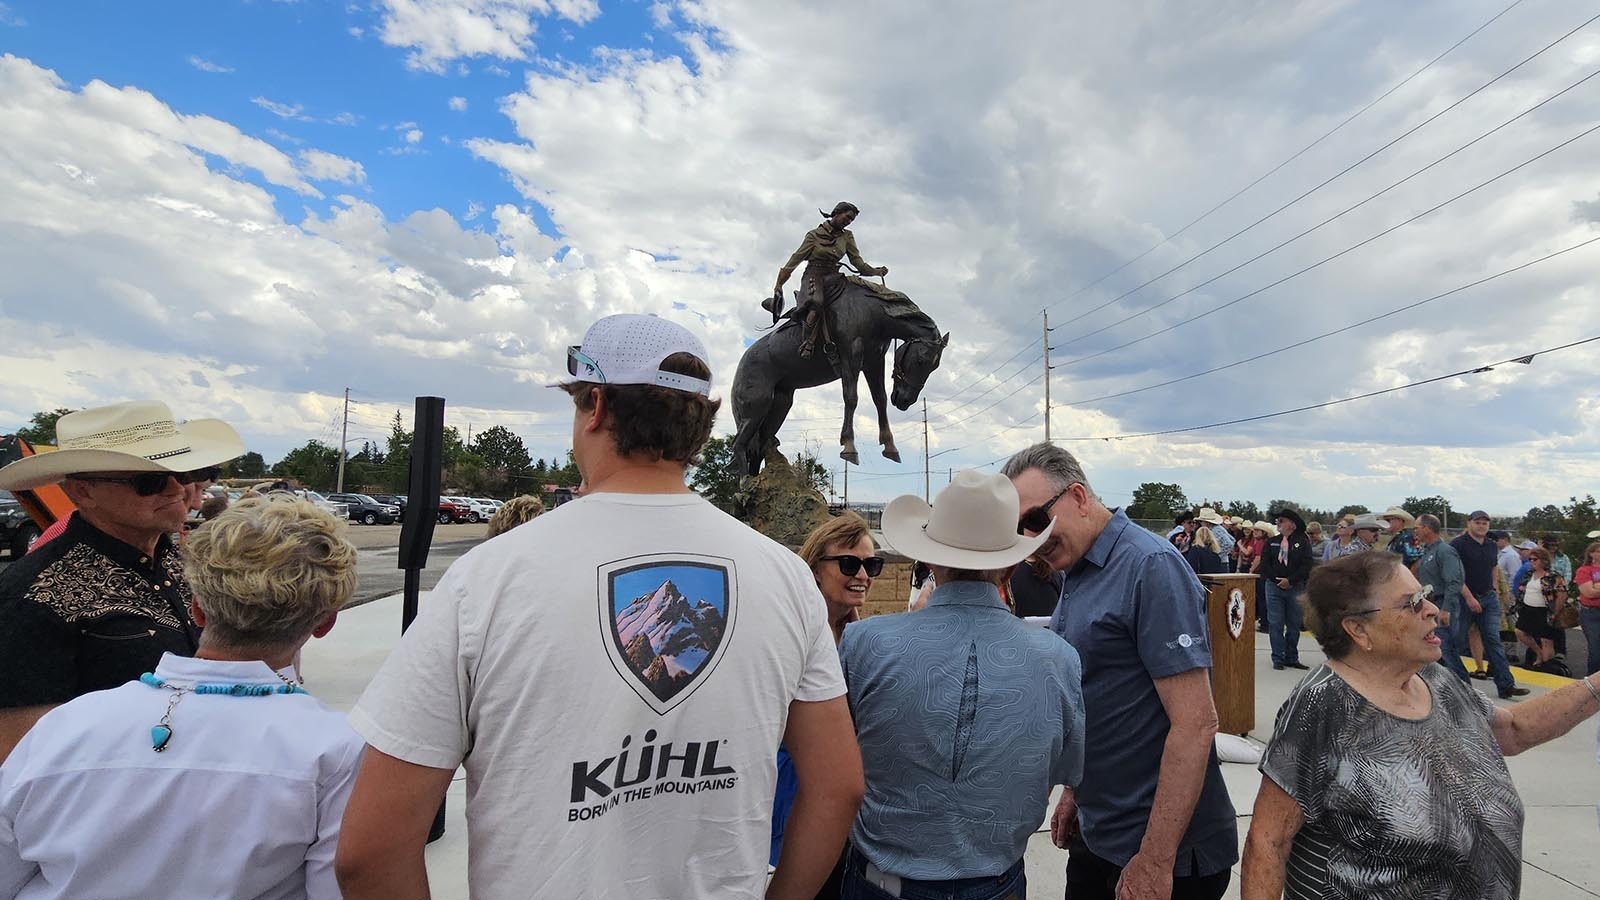 Crowds gathered to admire the "How 'Bout Them Cowgirls" sculpture placed at Frontier Park for the Year of the Cowgirl right across from the Chris LeDoux statue at the Cheyenne Frontier Days grounds.